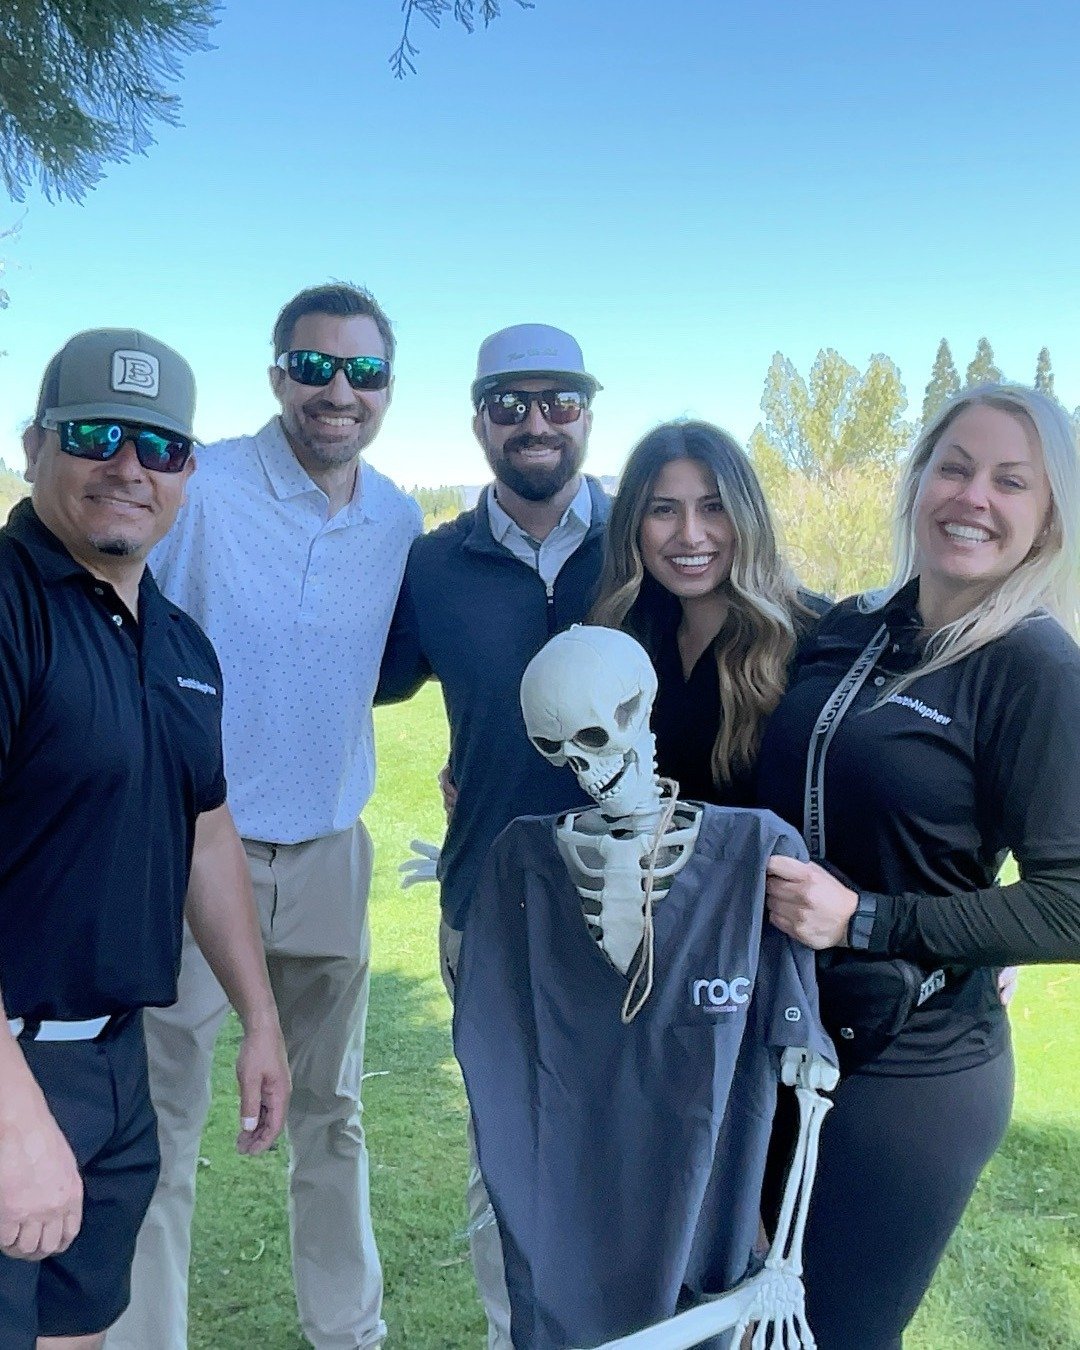 We were happy to set up a photo booth yesterday at the Lakeridge Golf Course to support the @roc_foundation first annual Swinging Fore Scholarships event!
.
.
.
 #GolfReno #GolfTournament #RenoGolf #TahoeGolf #ROCFoundation #ROCReno #PhotoBoothRental